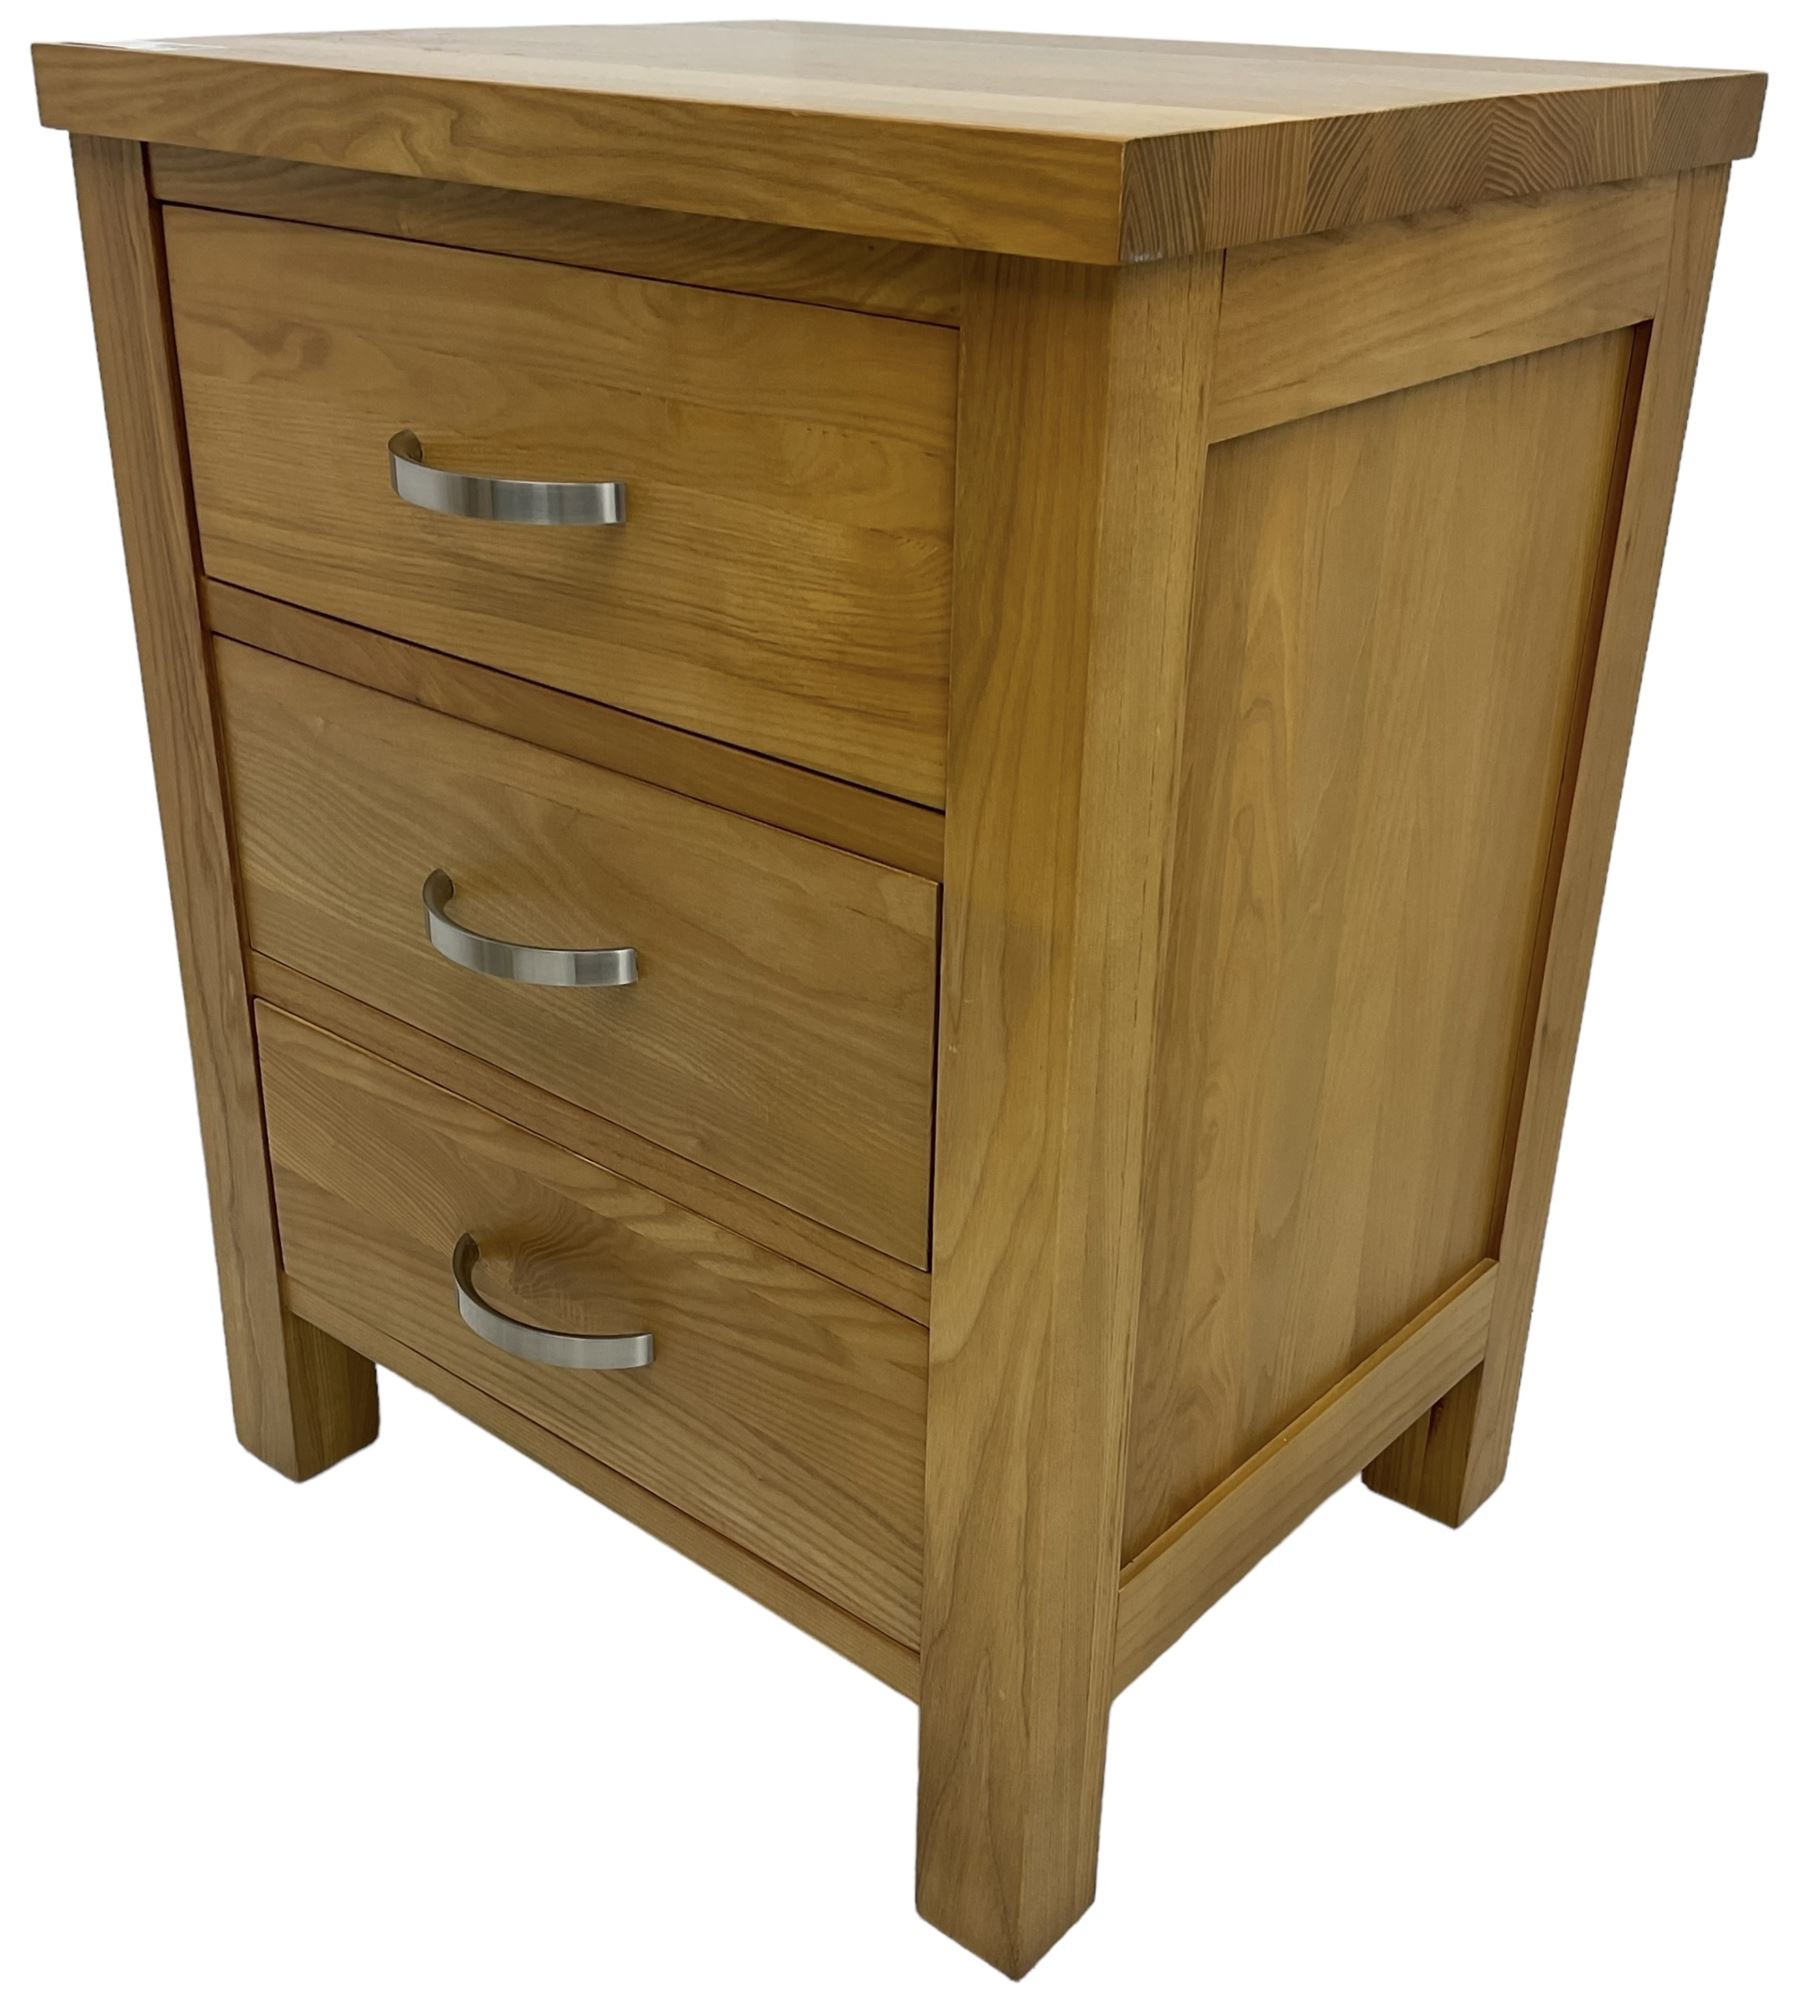 Light ash three drawer bedside chest - Image 3 of 7